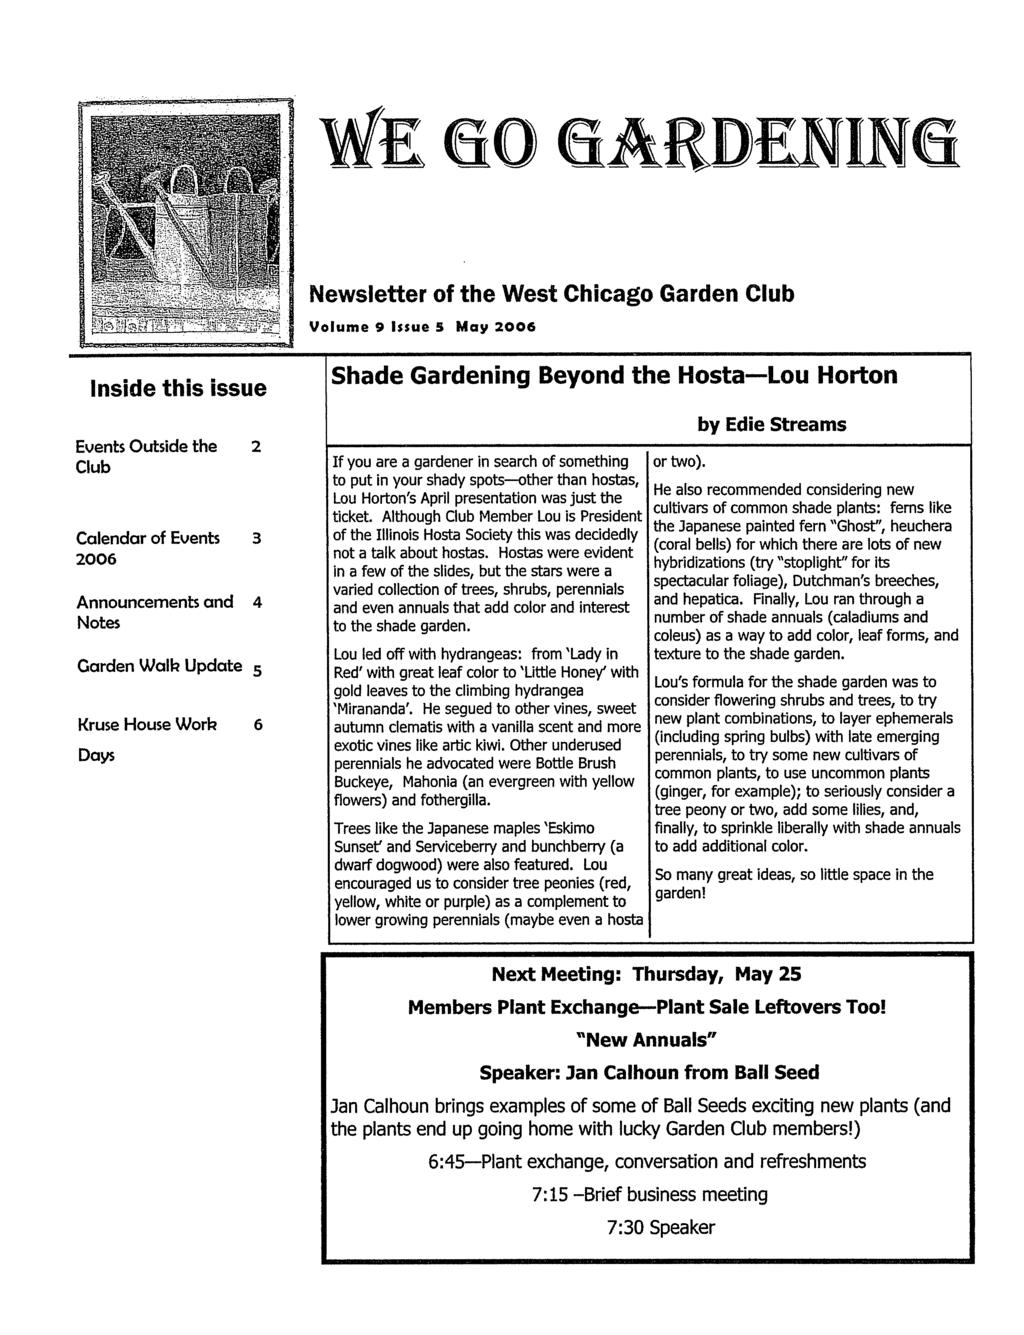 Newsletter of the West Chicago Garden Club Volume 9 Issue 5 May 2006 Inside this issue Events Outside the 2 Club Calendar of Events 3 2006 Announcements and 4 Notes Garden Wali~ Update 5 Kruse House